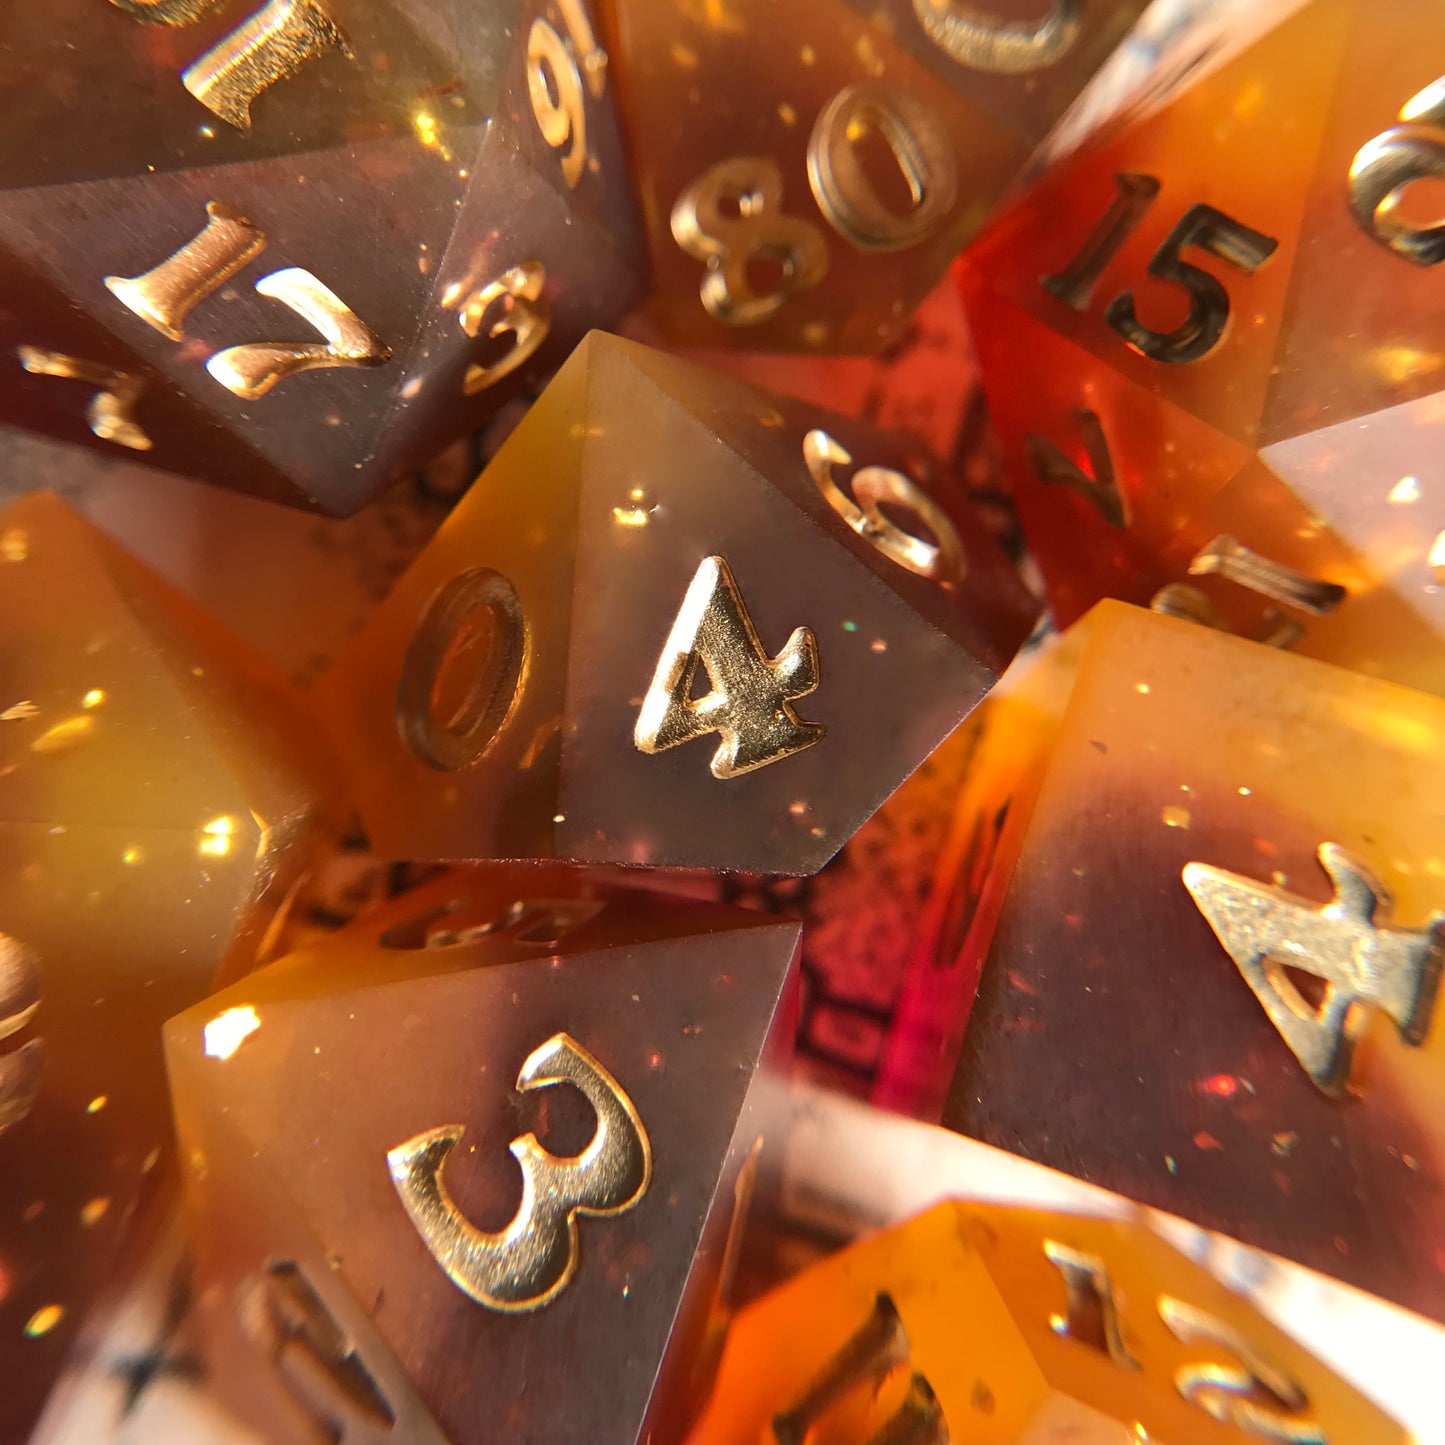 The Promised – 7-piece Polyhedral Dice Set